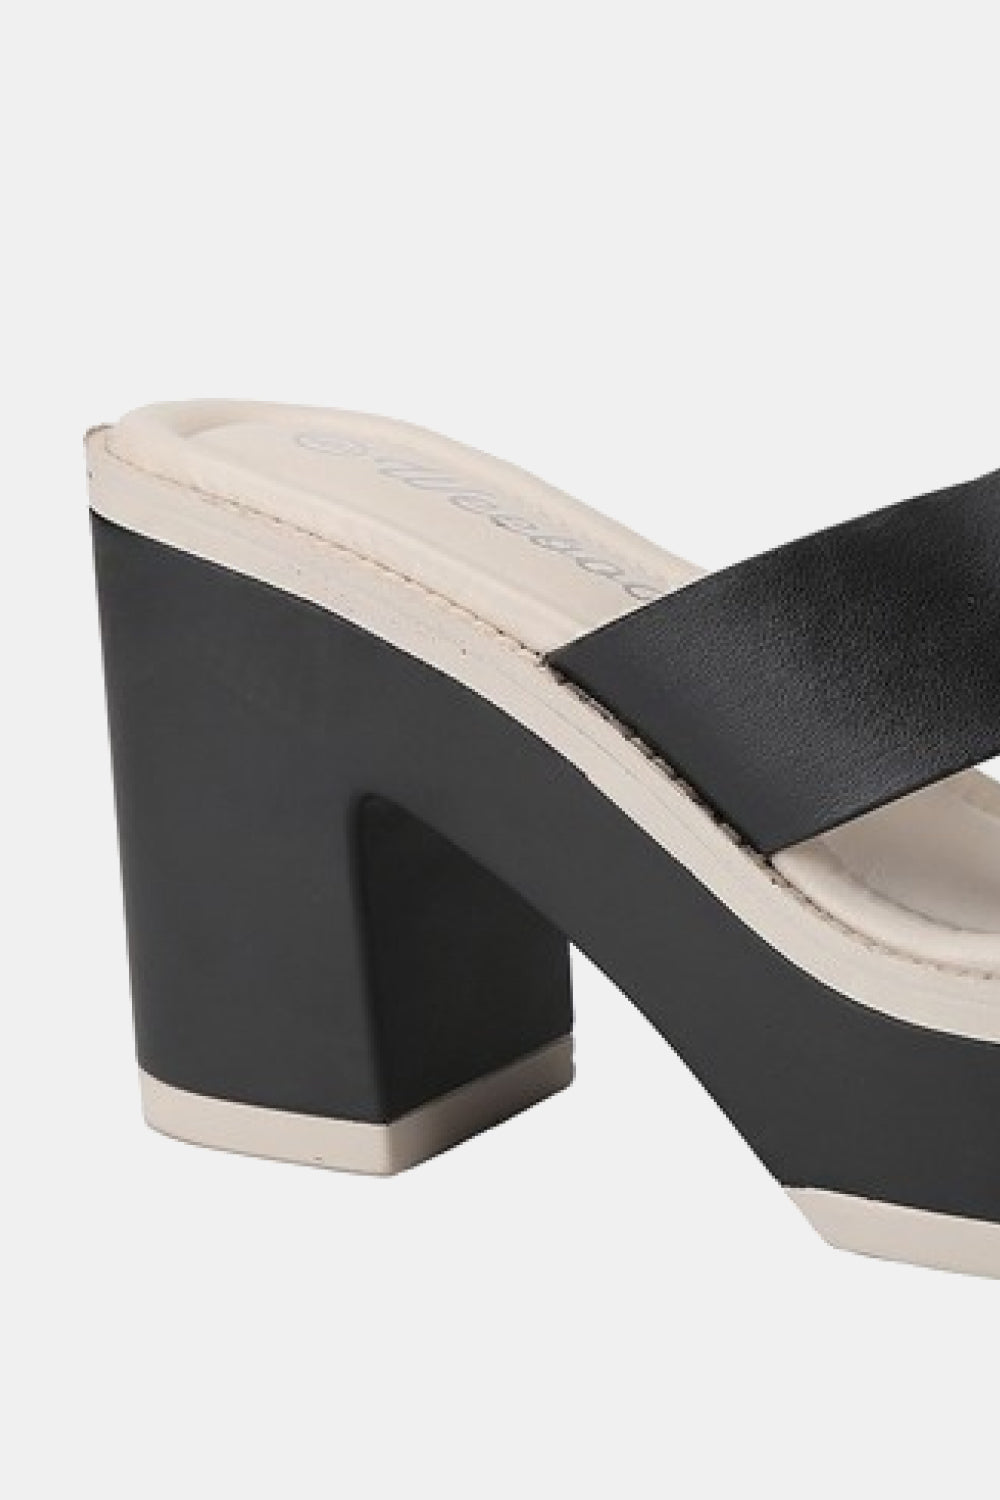 Weeboo Cherish The Moments Contrast Platform Sandals in Black